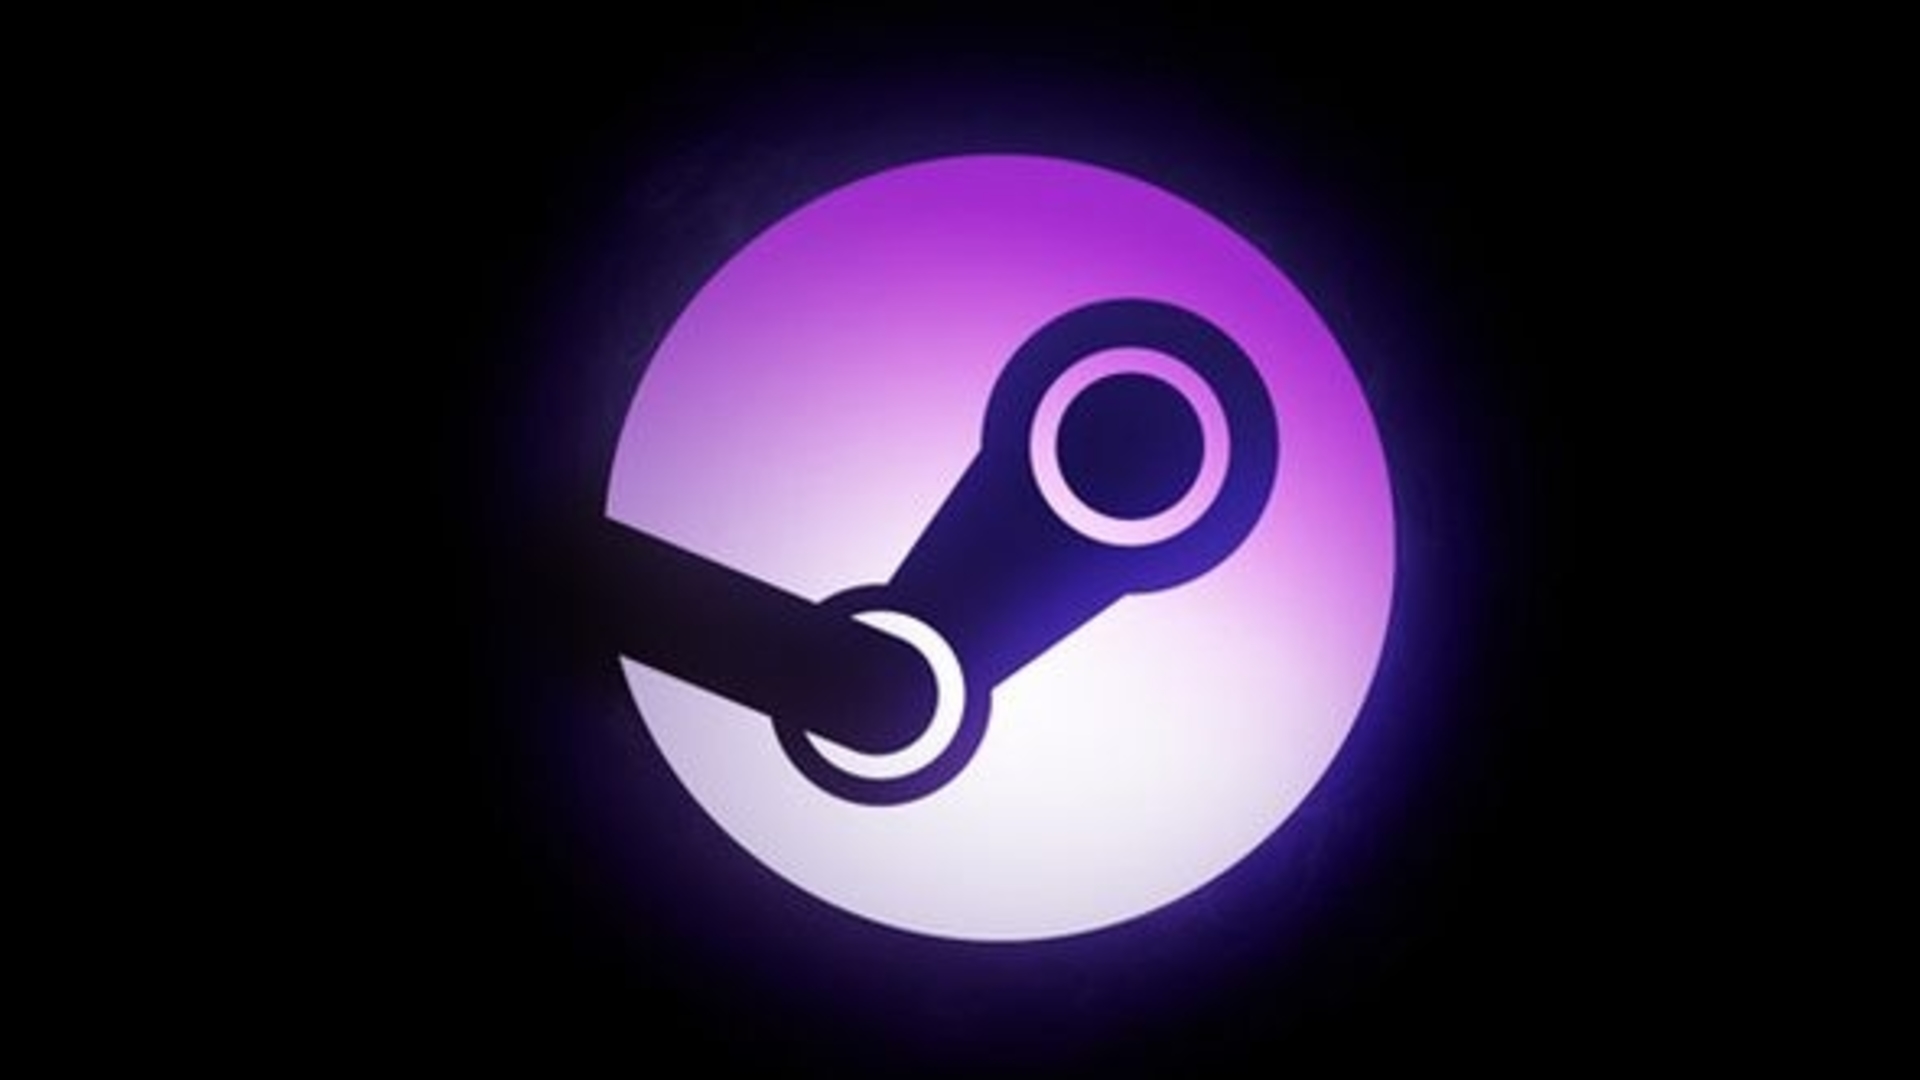 A sneak peek at a new Steam UI may have leaked